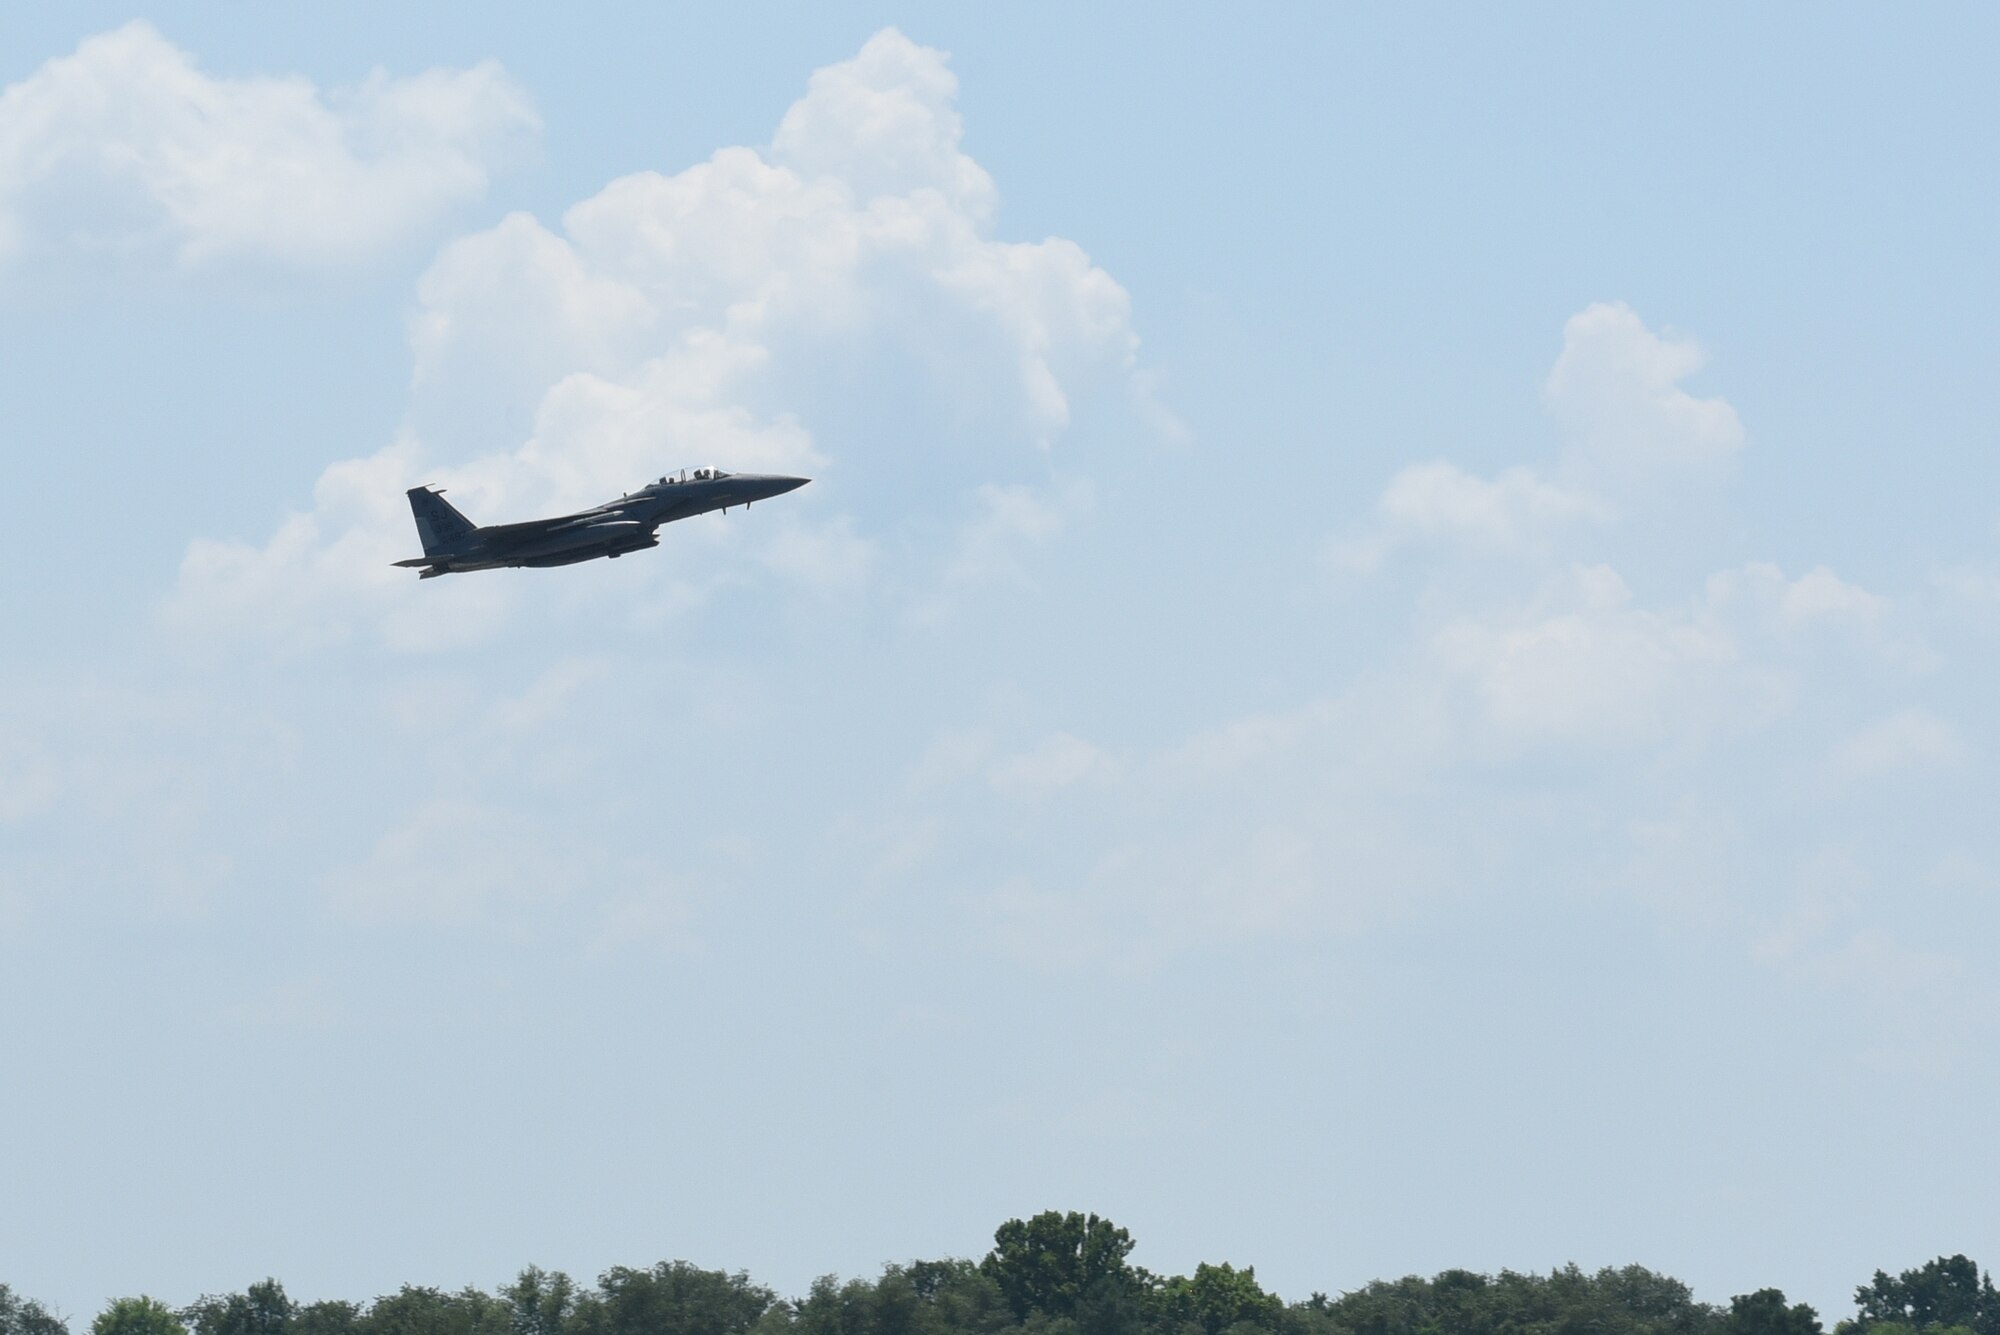 An F-15E Strike Eagle departs the runway during exercise Thunderdome 17-02, July 21, 2017, at Seymour Johnson Air Force Base, North Carolina. The exercise scenario tested the wings ability to conduct a necessary rapid and appropriate response without any prior coordination. (U.S. Air Force photo by Airman 1st Class Victoria Boyton)